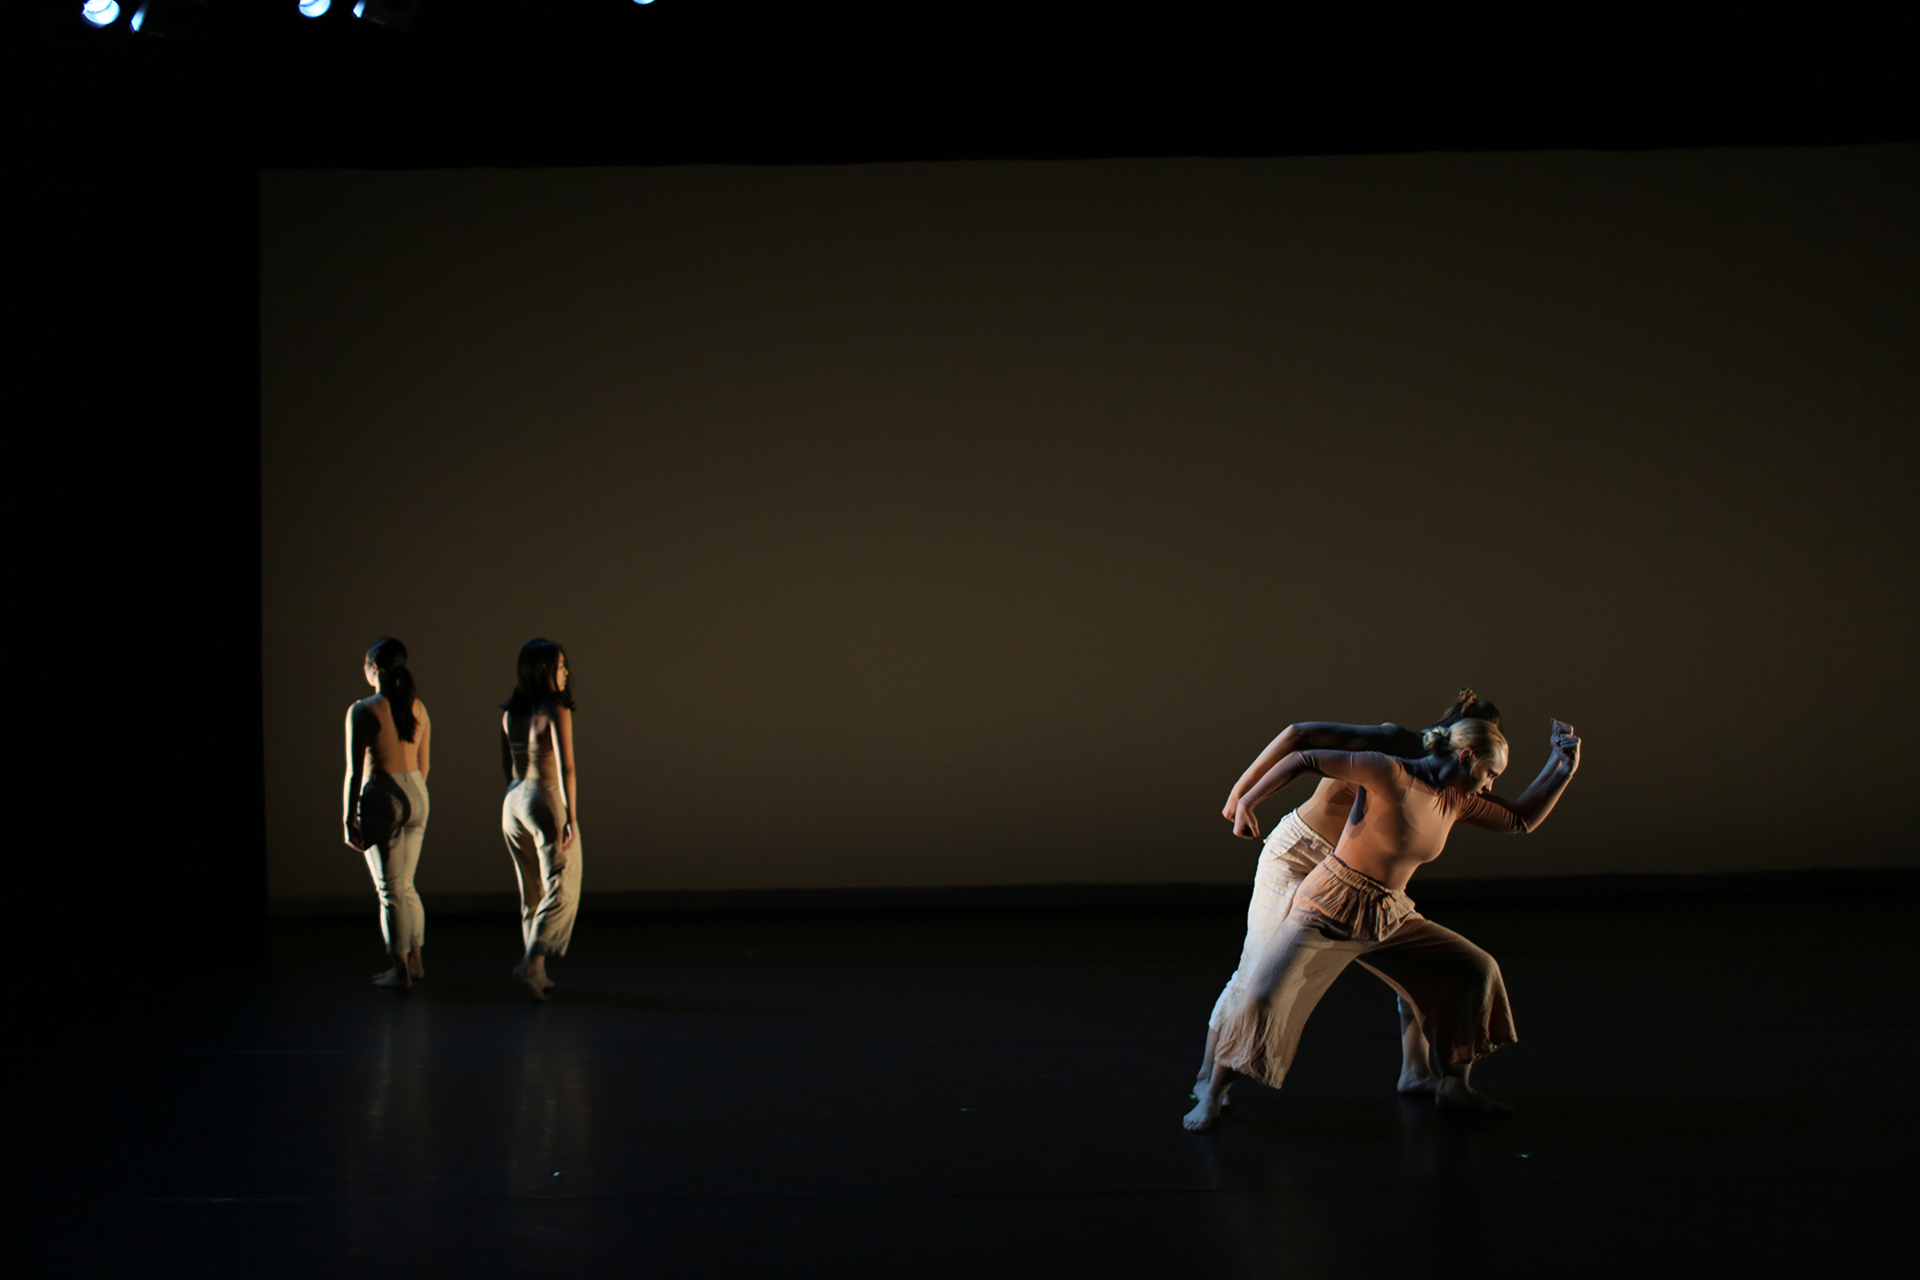 "BARE HOLD" CHOREOGRAPHED BY DEAN HUSTED IN COLLABORATION WITH THE DANCERS